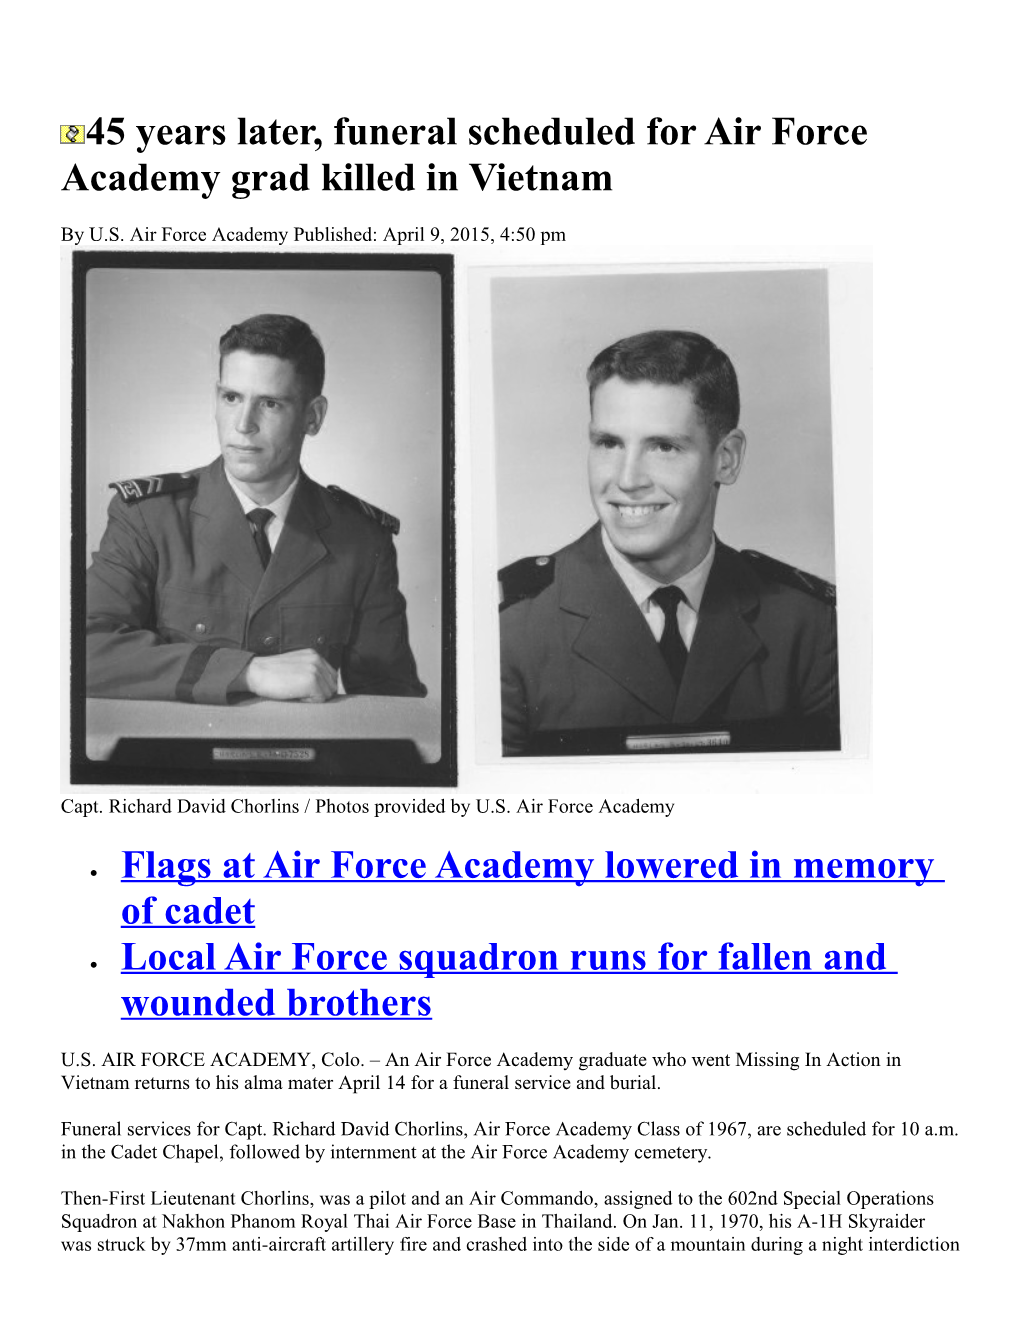 45 Years Later, Funeral Scheduled for Air Force Academy Grad Killed in Vietnam